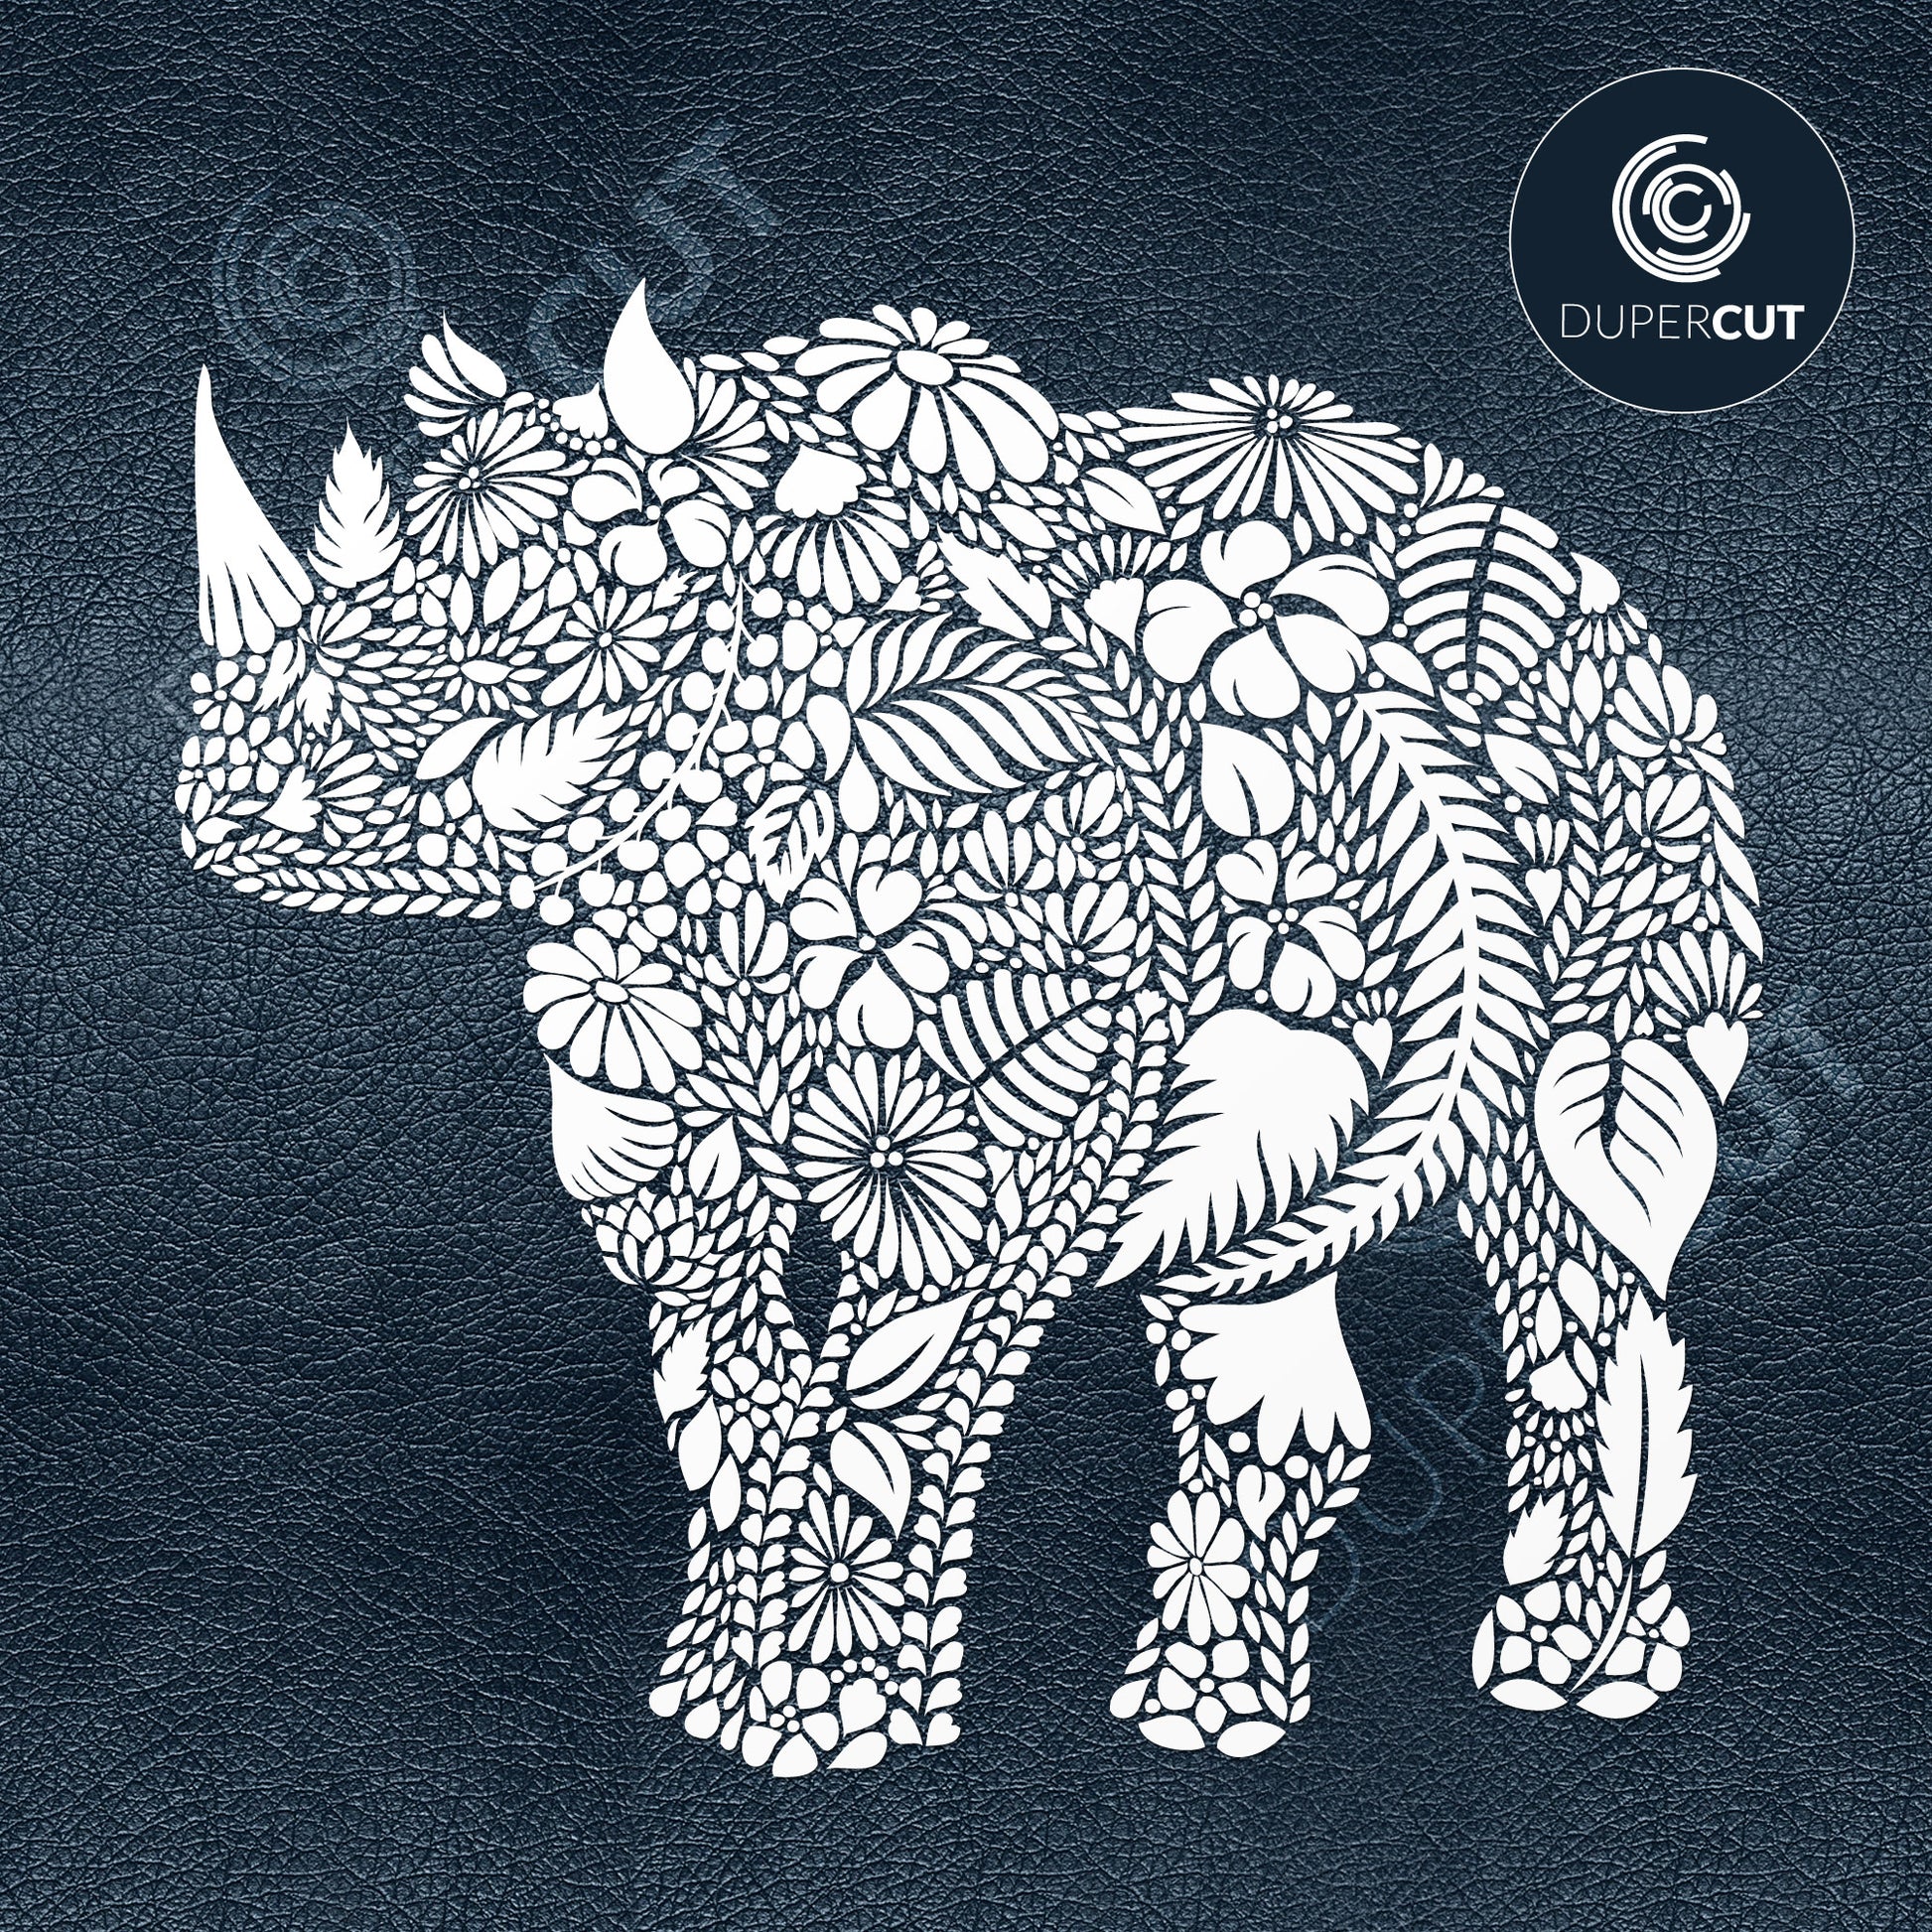 Rhinocros floral zentangle. SVG PNG DXF cutting files for Cricut, Silhouette, Glowforge, print on demand, sublimation templates